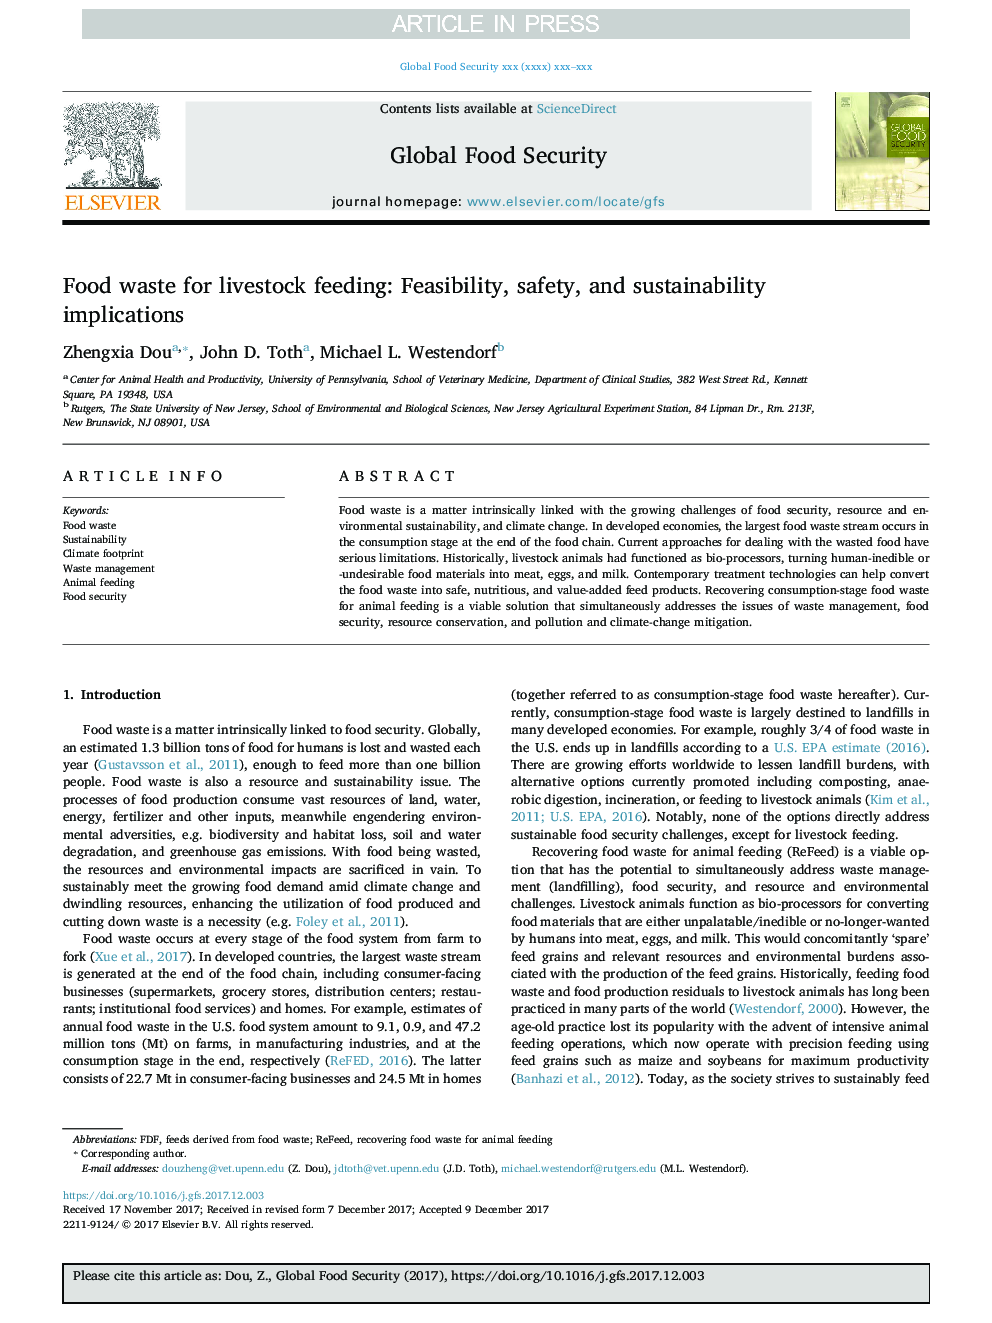 Food waste for livestock feeding: Feasibility, safety, and sustainability implications